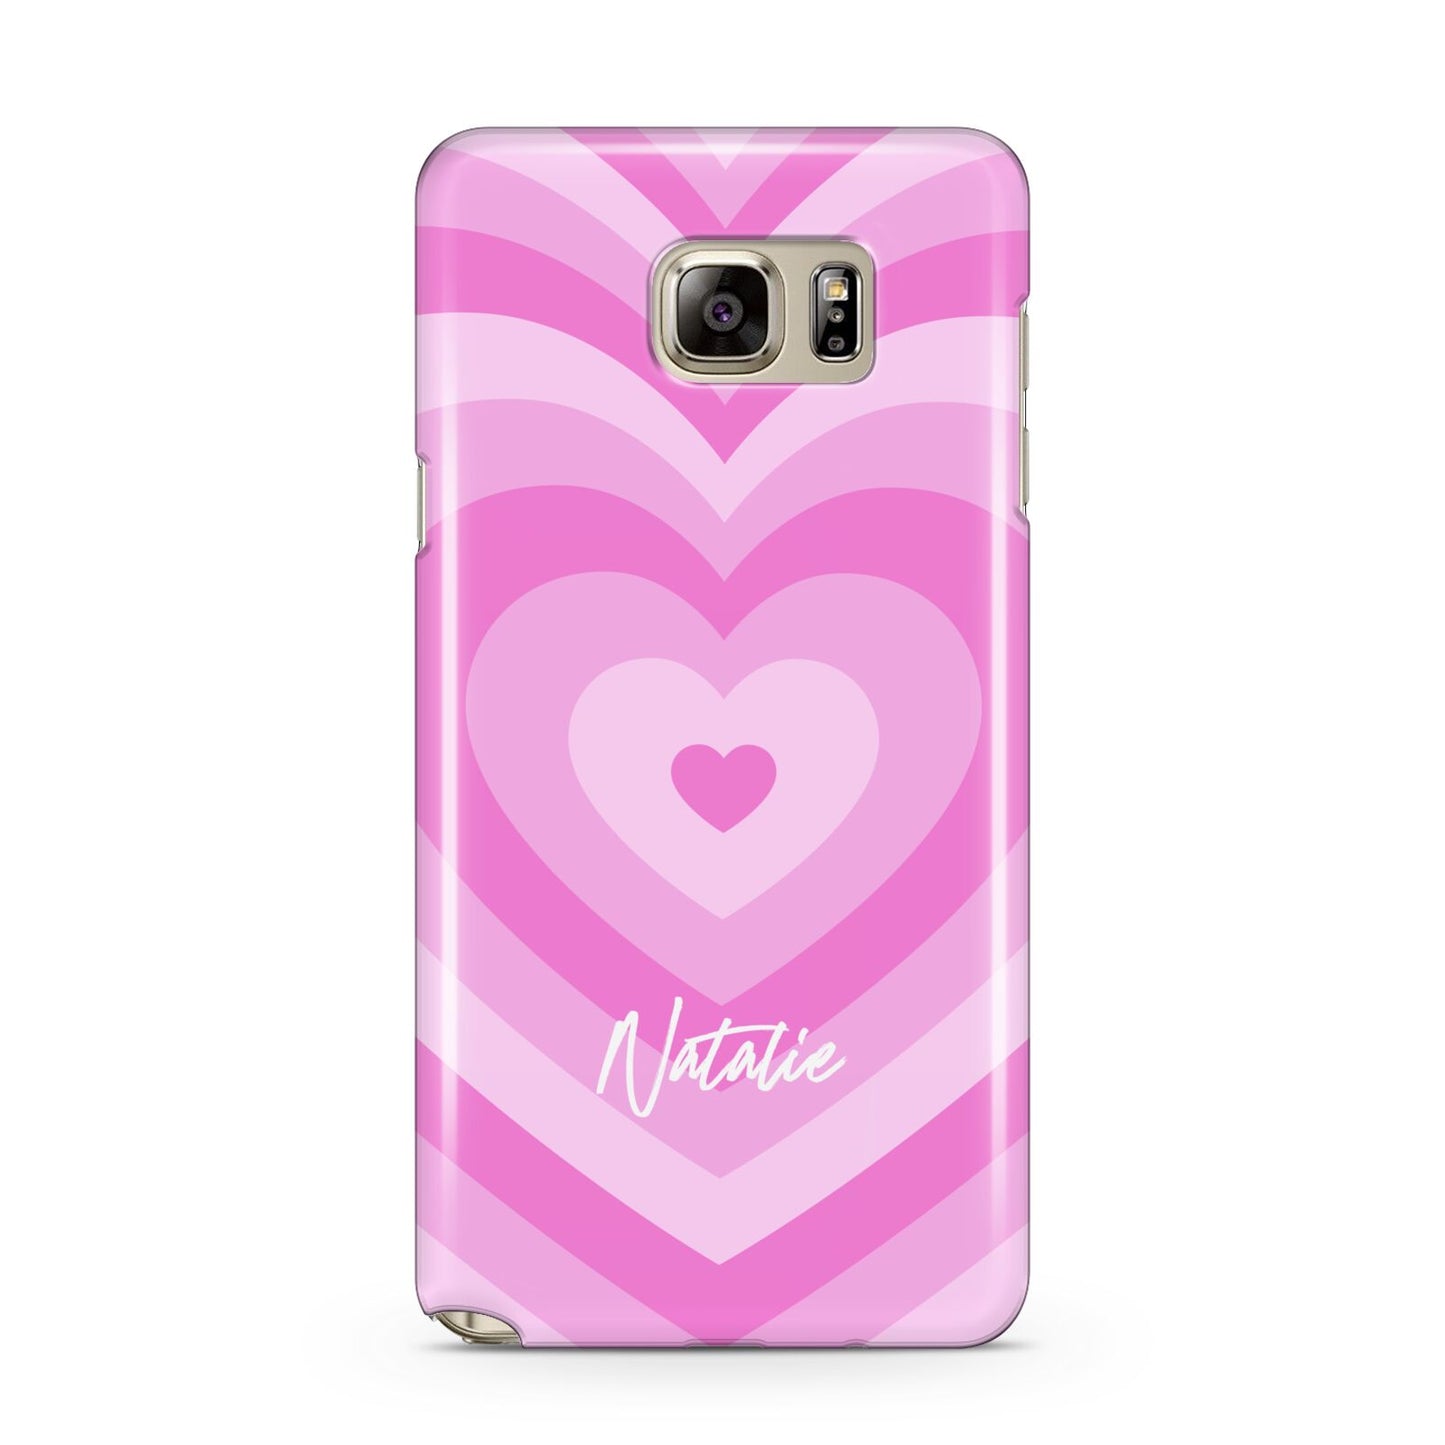 Personalised Pink Heart Samsung Galaxy Note 5 Case